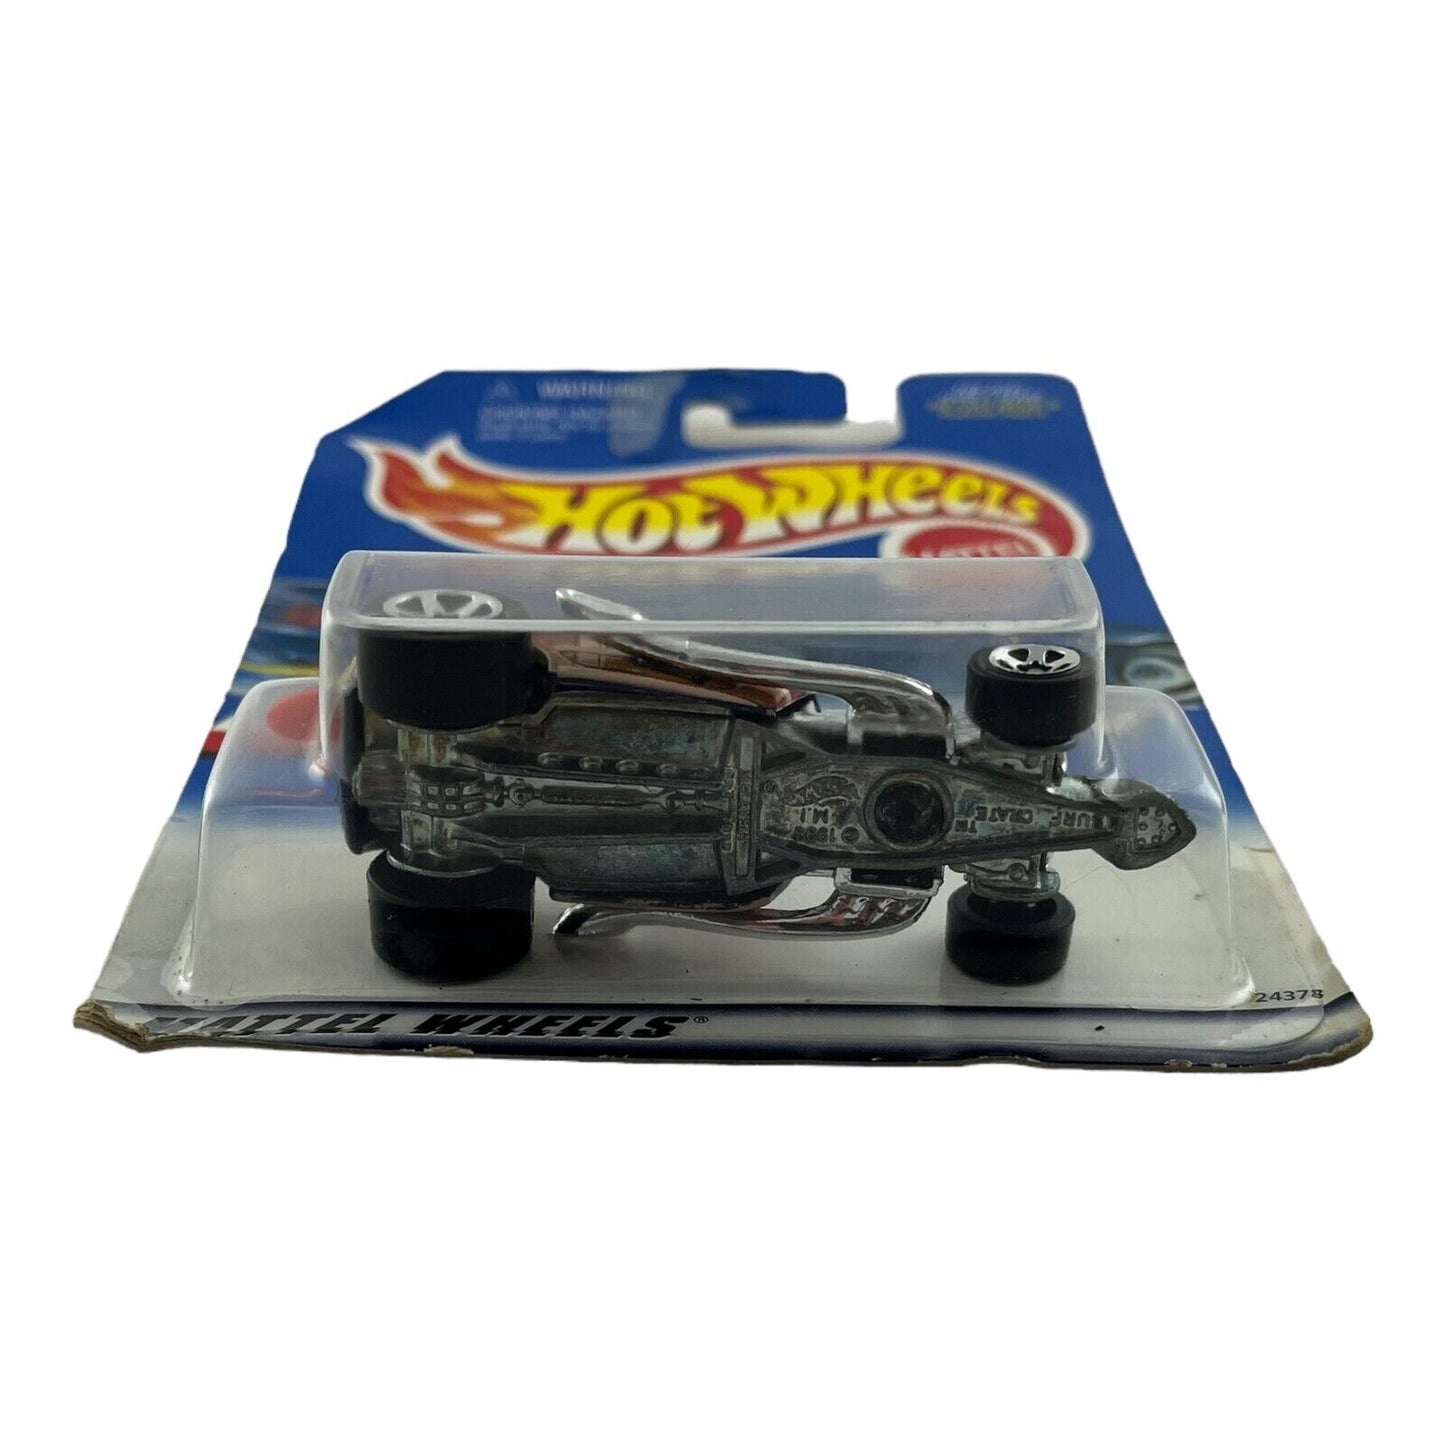 Hot Wheels 2000 First Editions Surf Crate 13/36 Diecast Vehicle Mattel